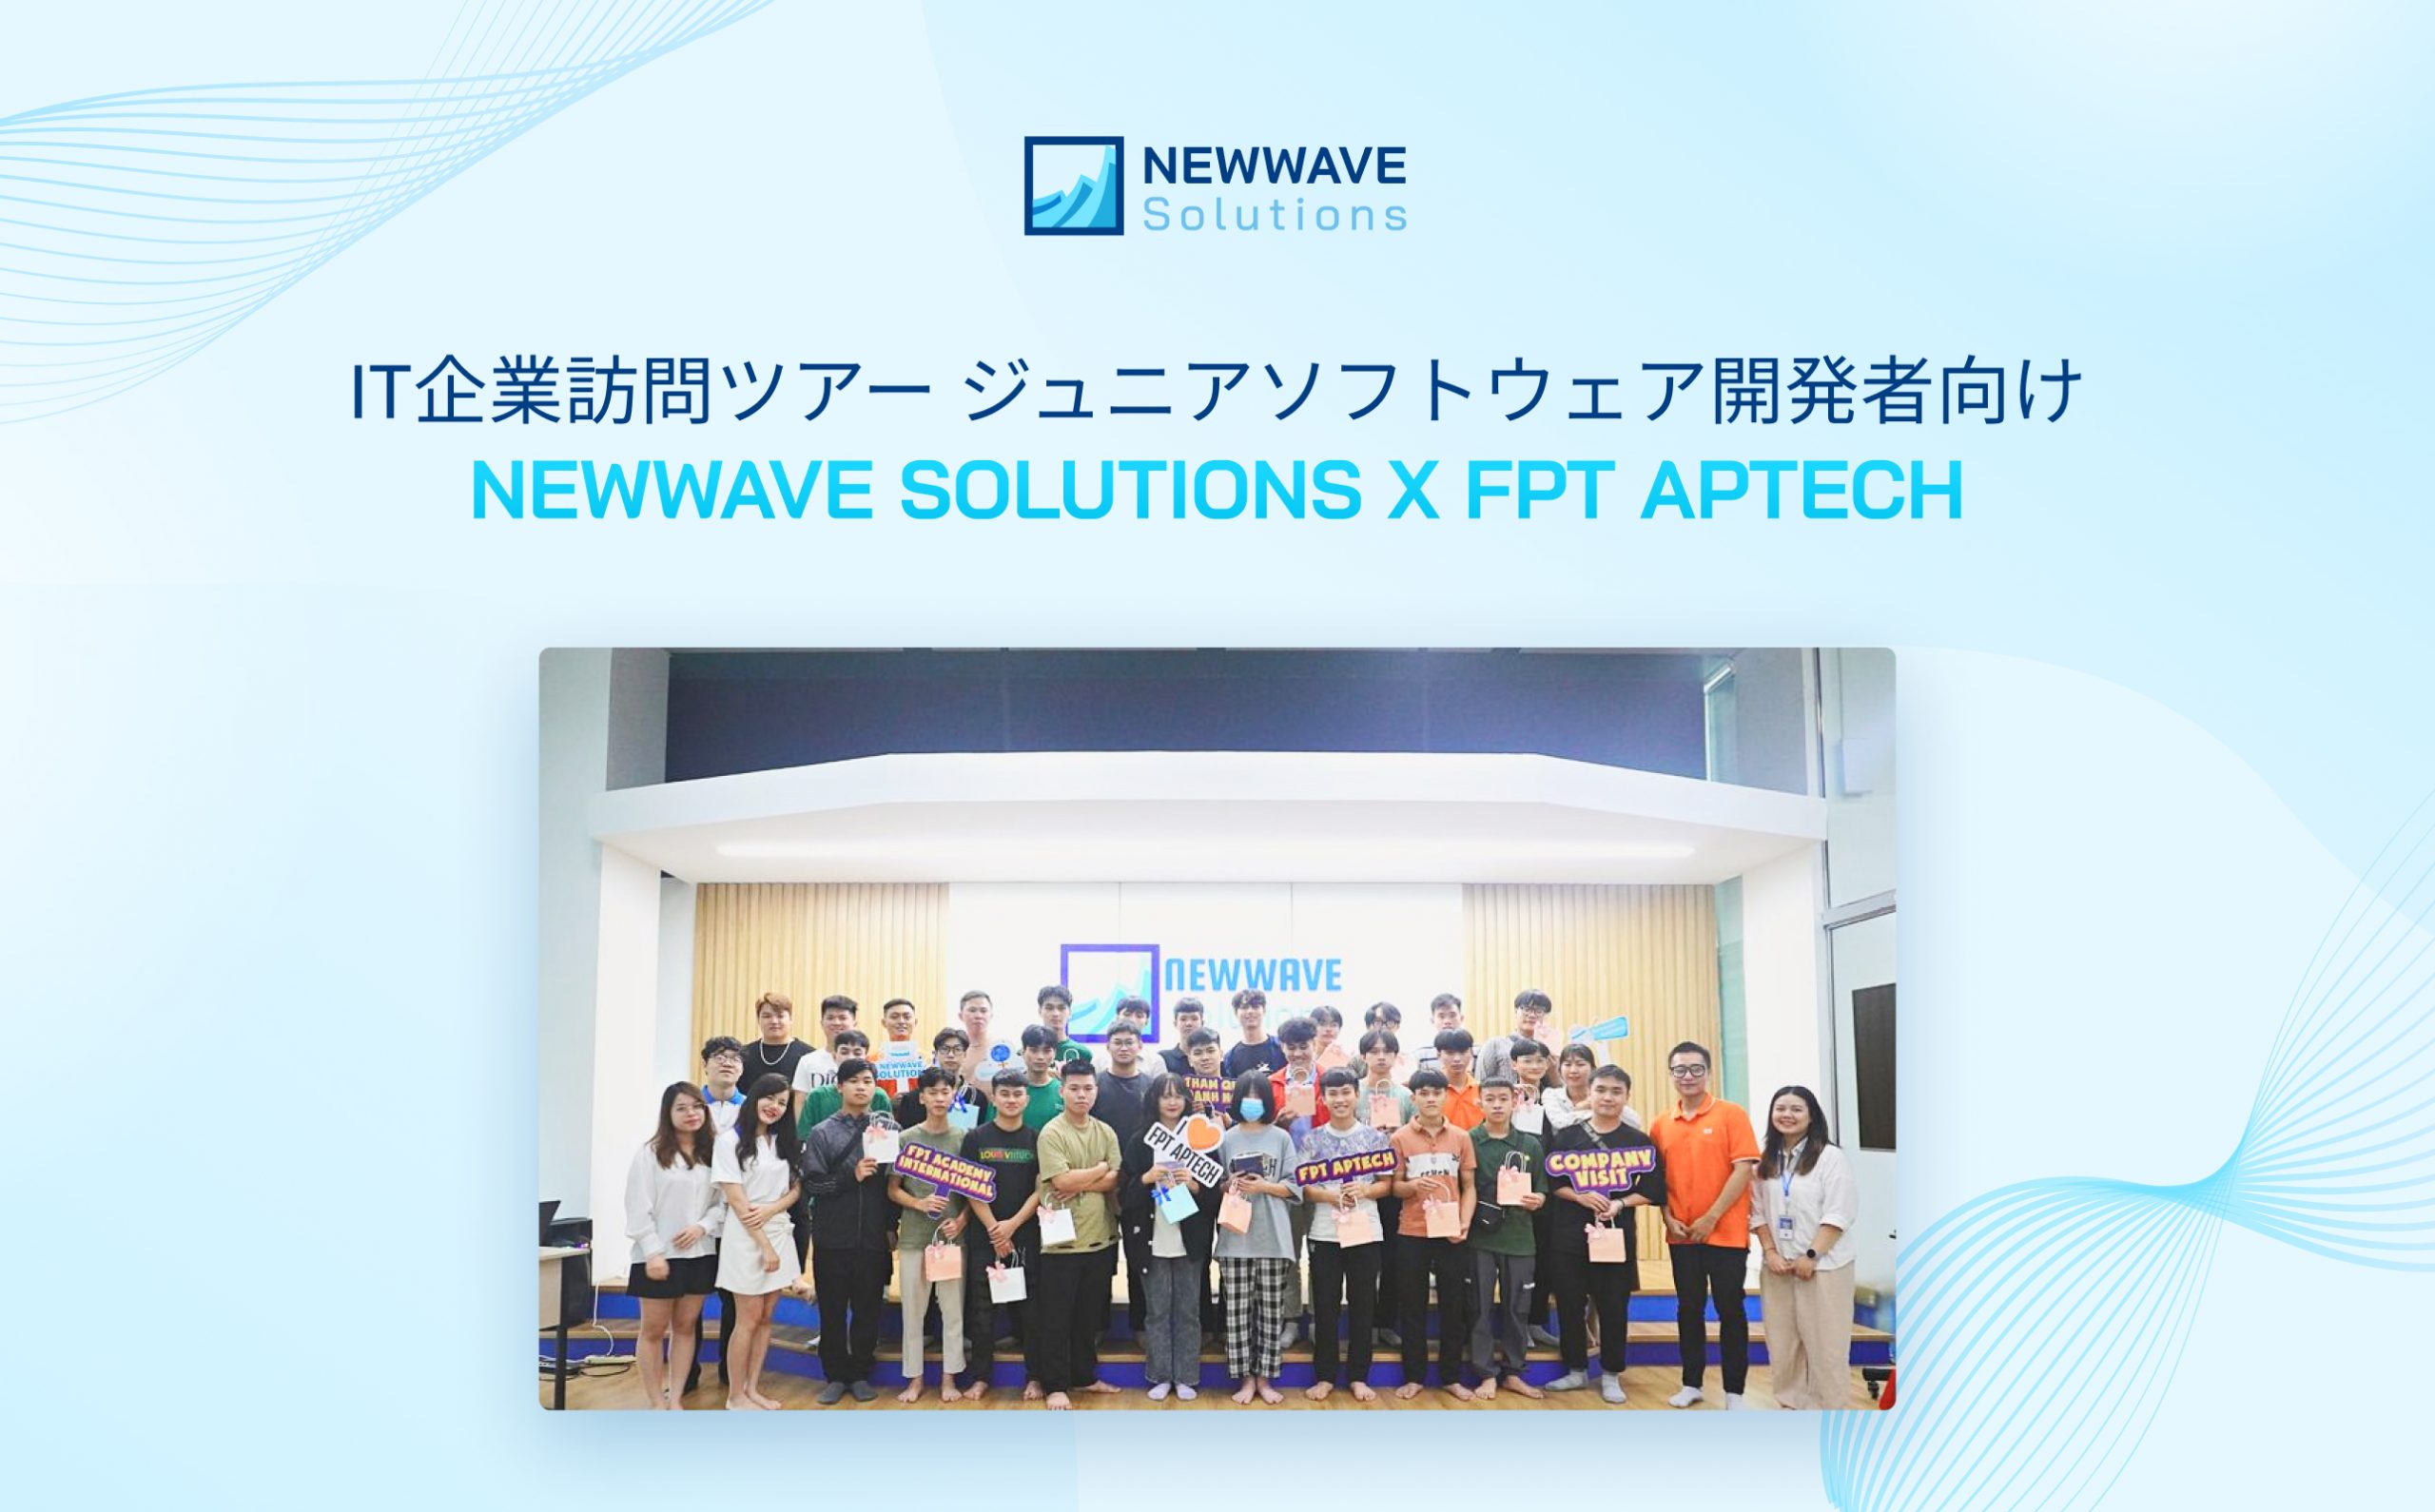 Newwave Solutions x FPT Aptech